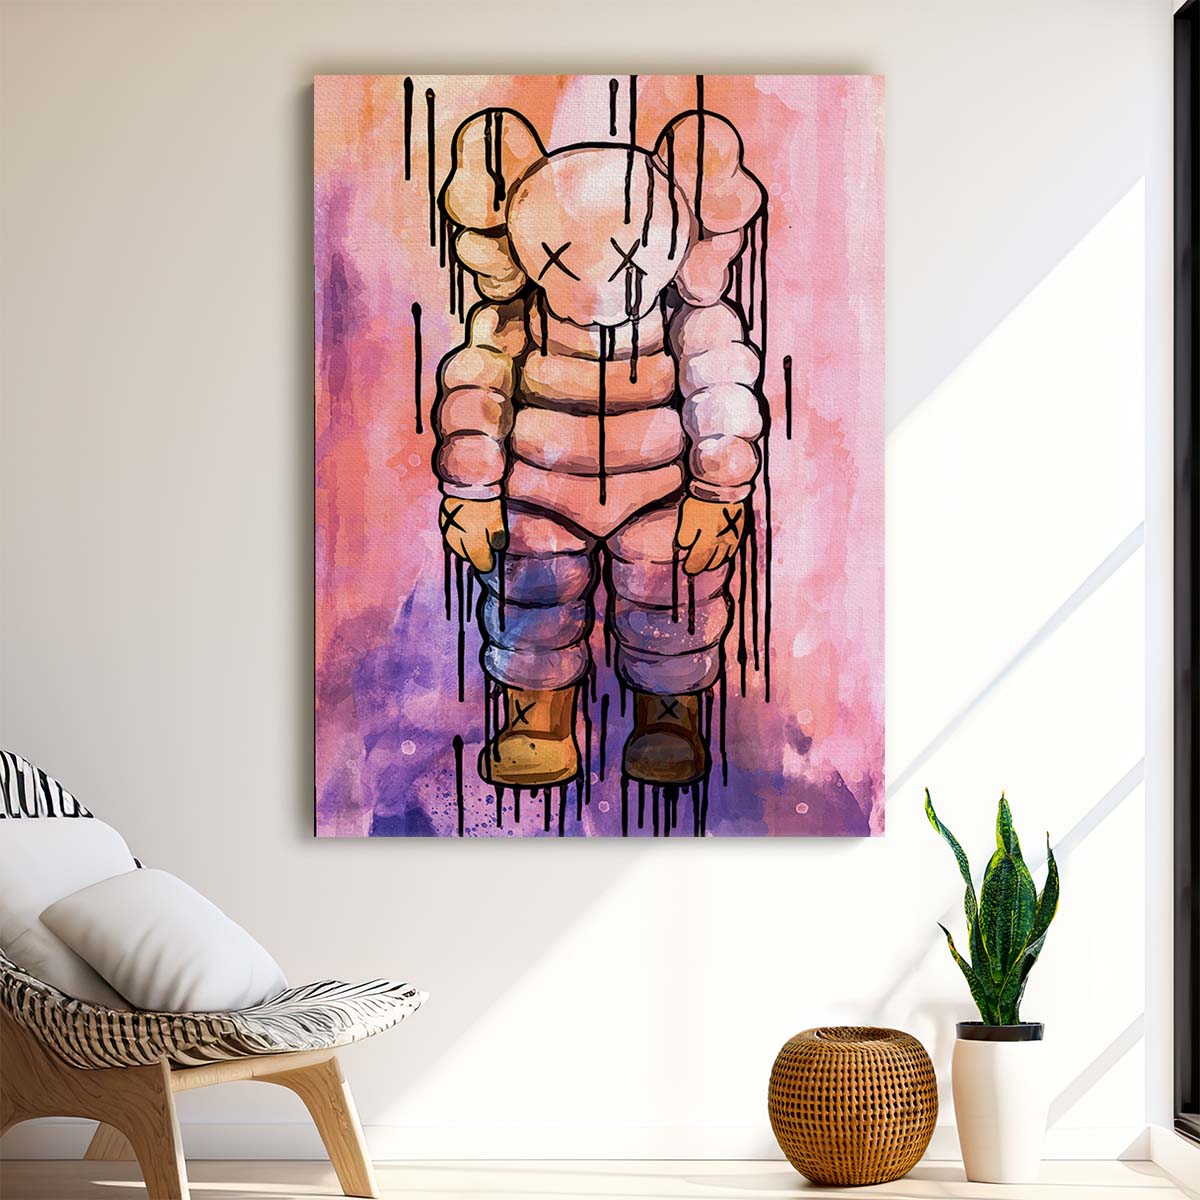 Tired Fat Kaws What Party Wall Art by Luxuriance Designs. Made in USA.